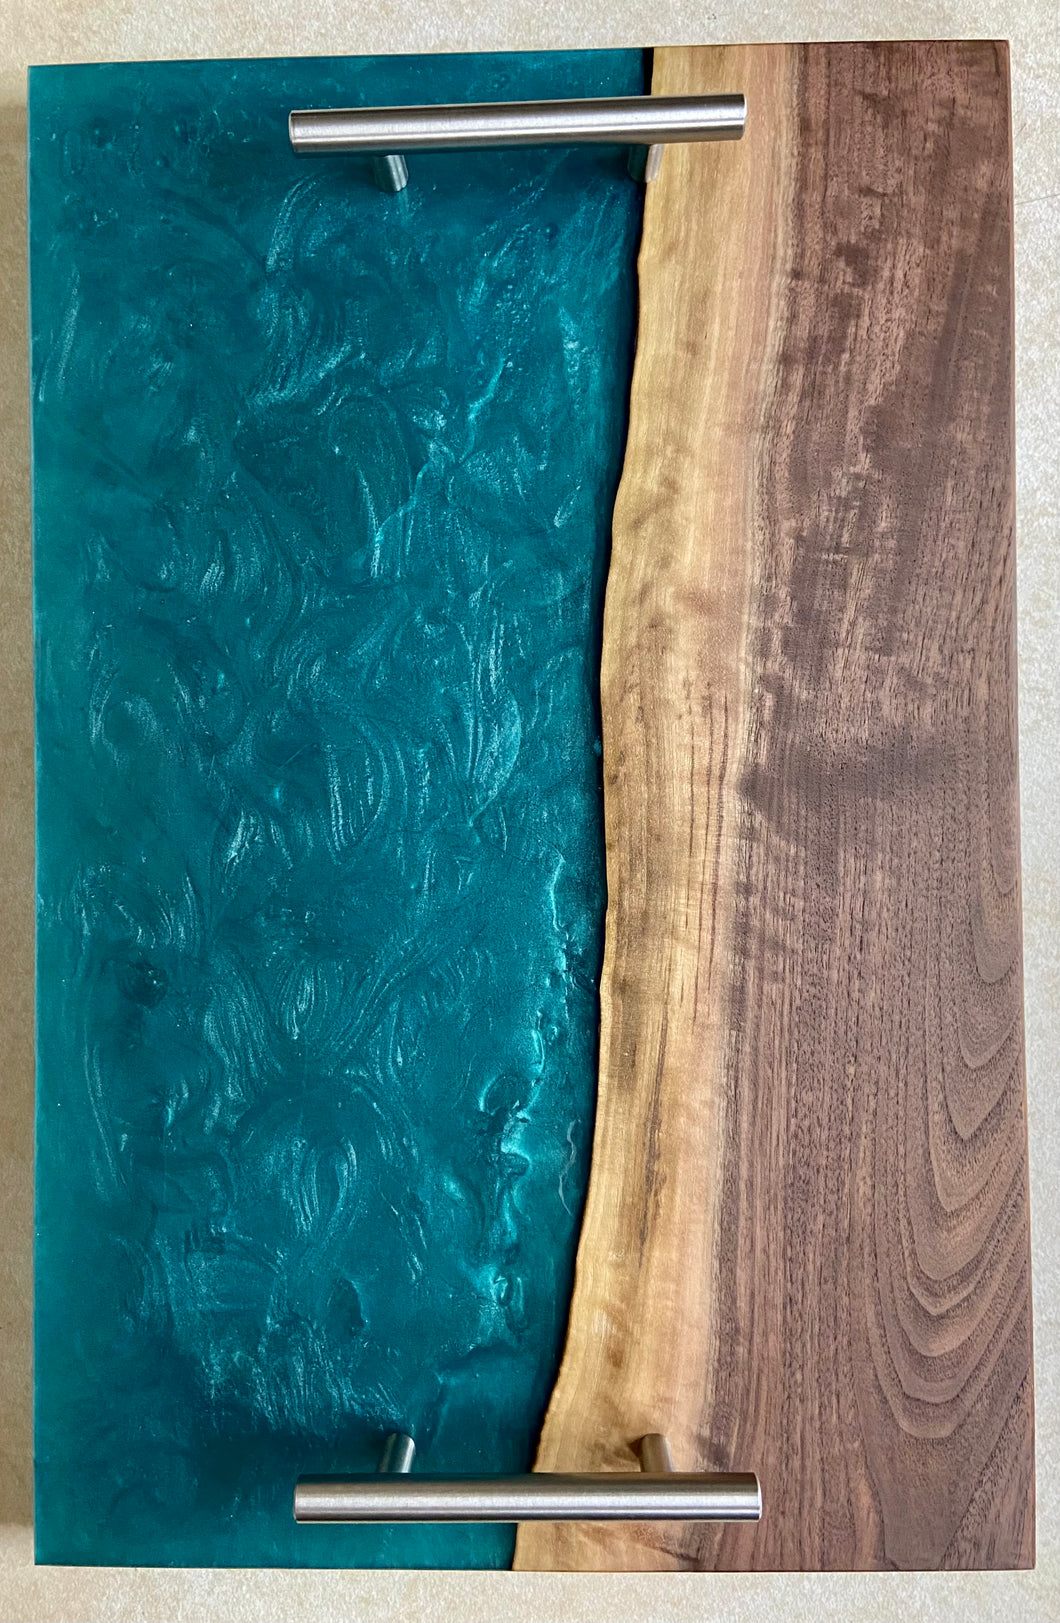 Walnut and teal Charcuterie board. 12” x 18”, modern silver handles and rubber